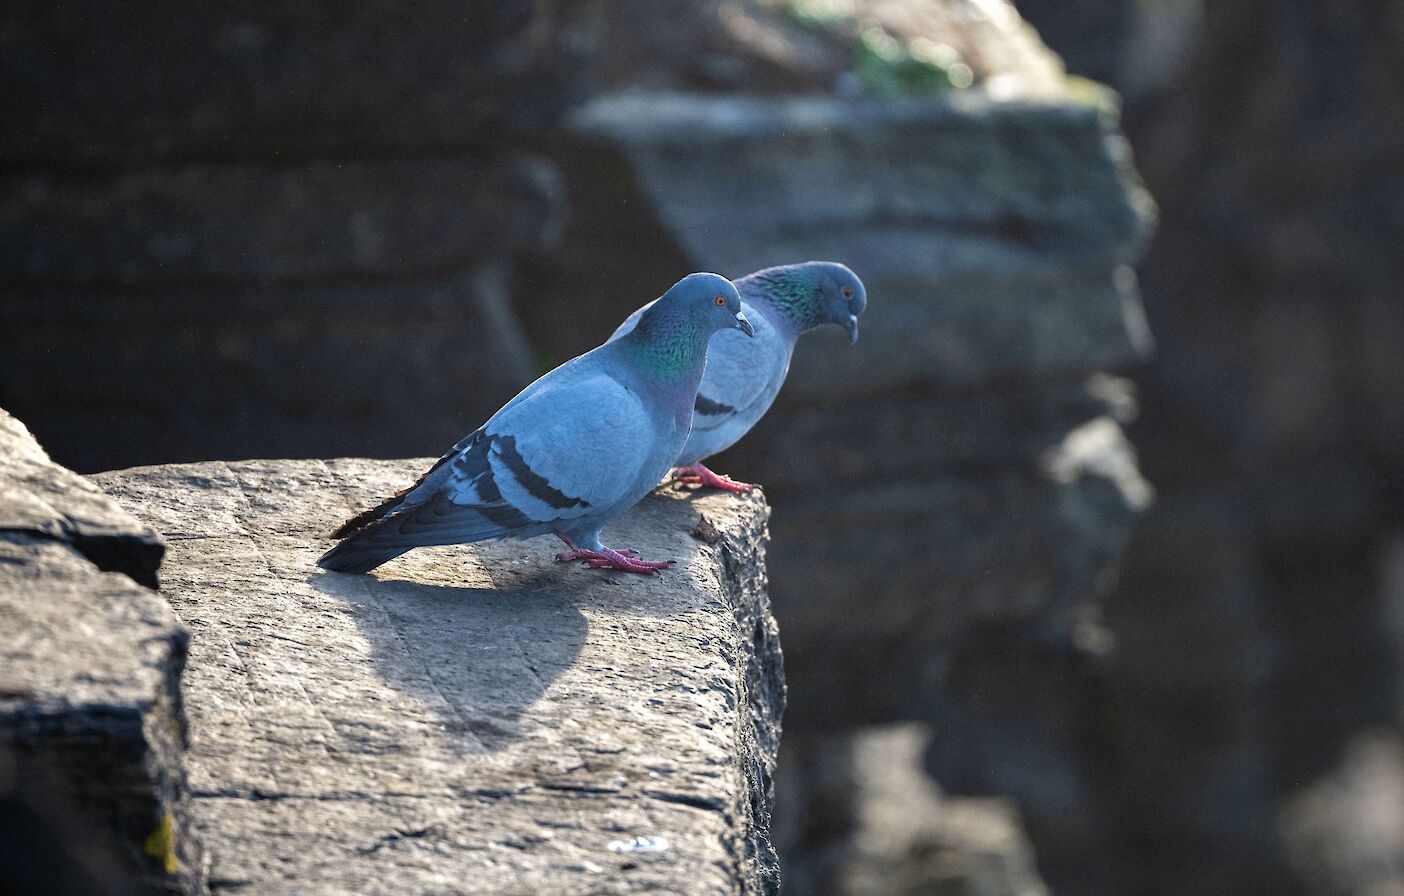 Rock doves in Orkney - image by Raymond Besant